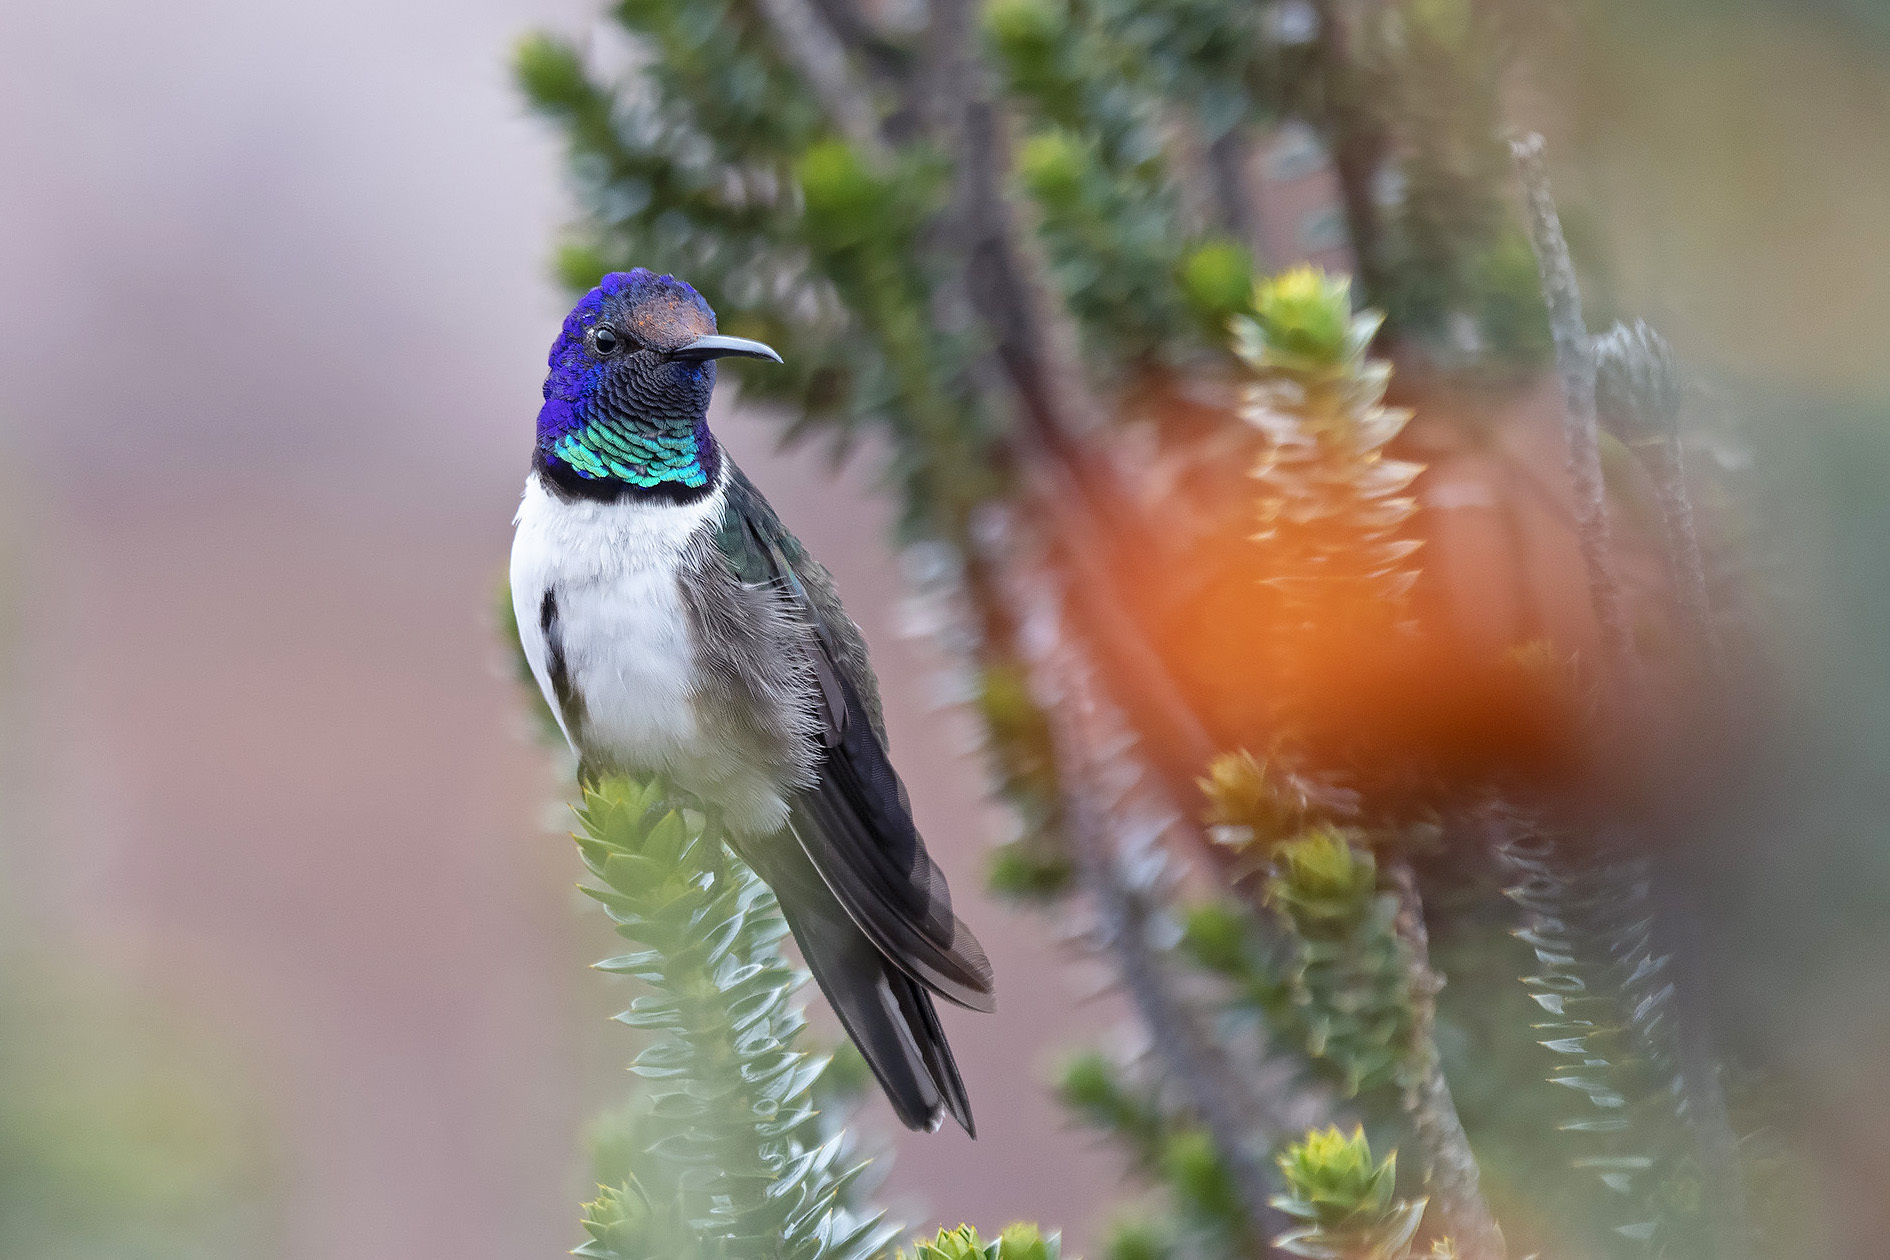 This 2018 photo provided by Paolo David Escobar shows a male Hillstar hummingbird perched on a Chuquiraga jussieui flower in Ecuador. A study released on Friday, July 17, 2020 finds that the species of hummingbirds can sing and hear frequencies beyond the range of other birds. The unusually high-pitched songs may help the birds woo above background noises in their windy, mountain environment. Photo: AP